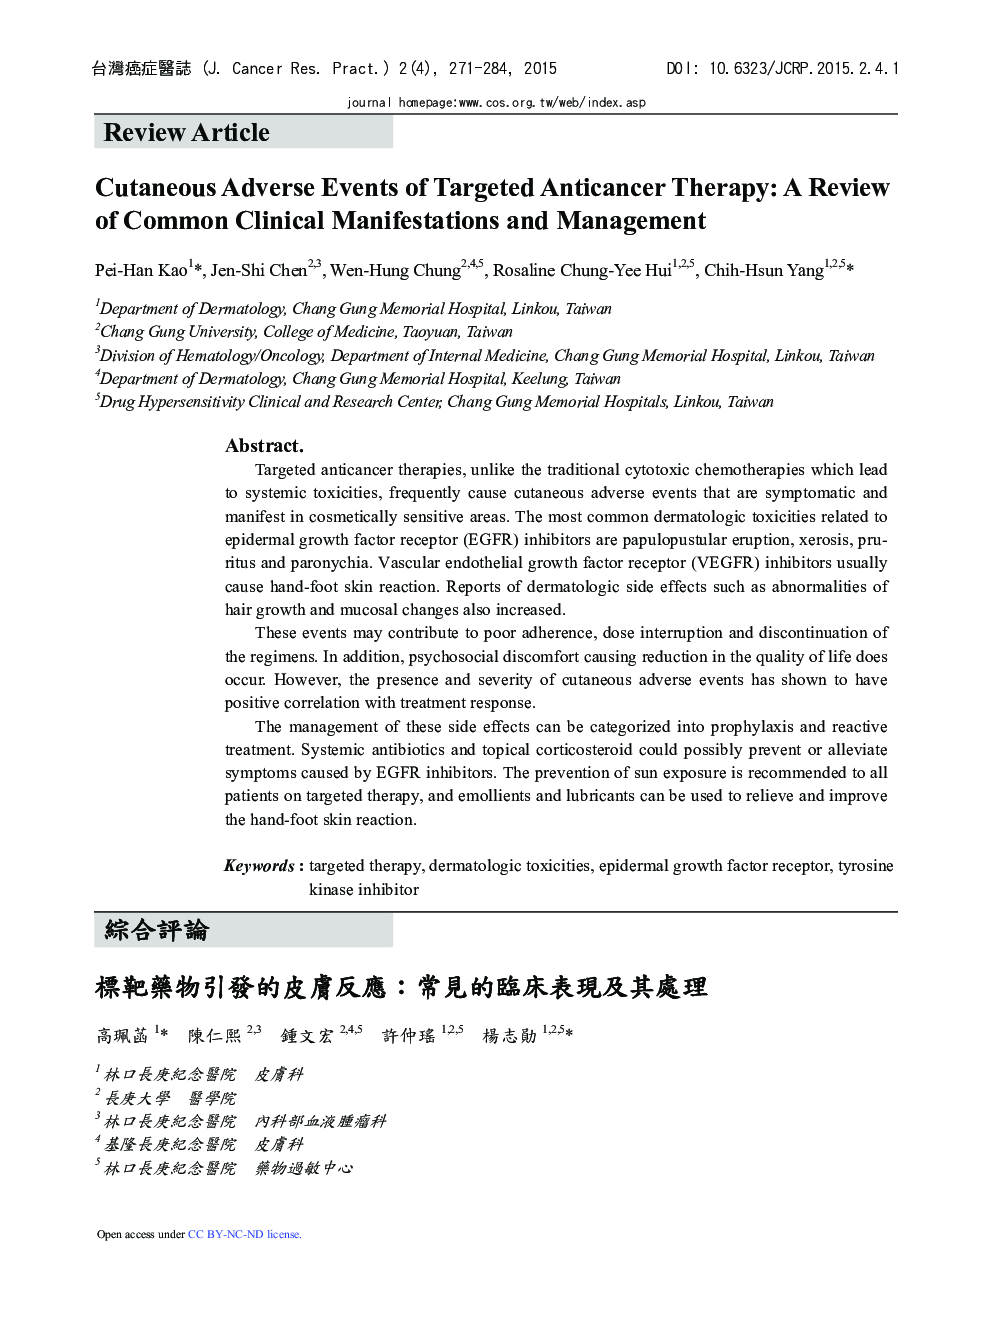 Cutaneous Adverse Events of Targeted Anticancer Therapy: A Review of Common Clinical Manifestations and Management